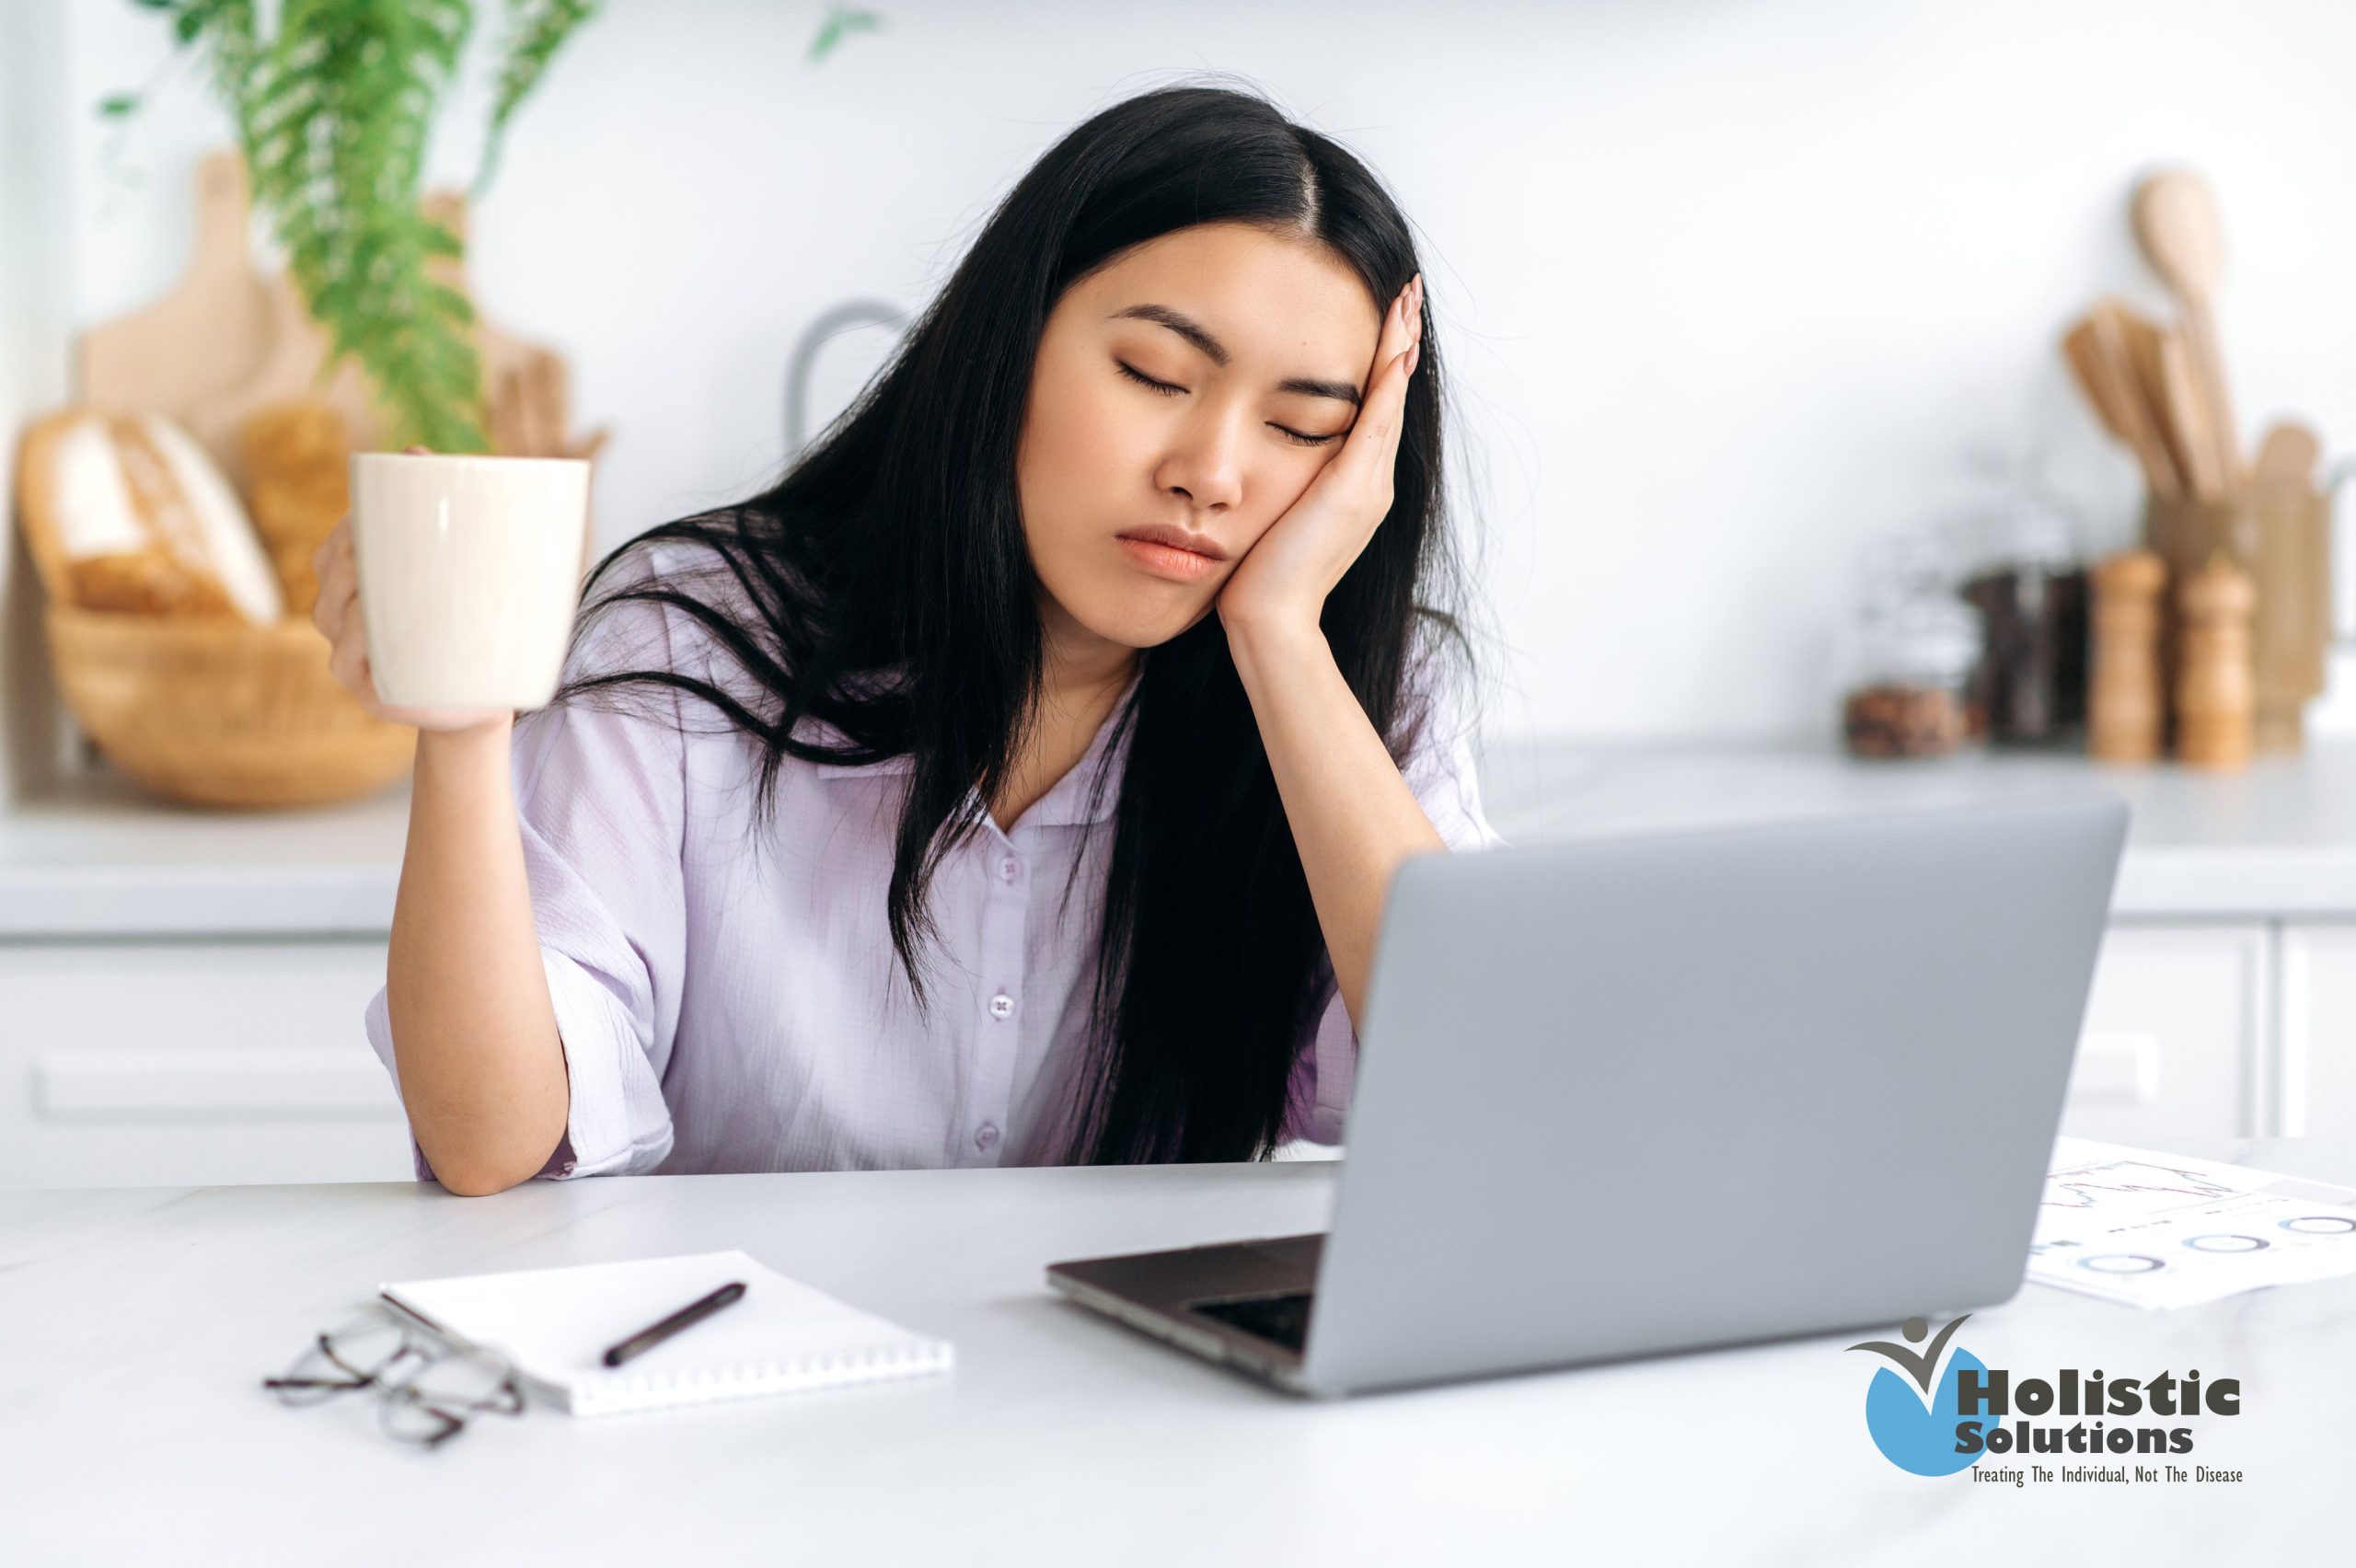 Are You Tired All The Time? Naturopathic Adrenal Treatment Could Help!